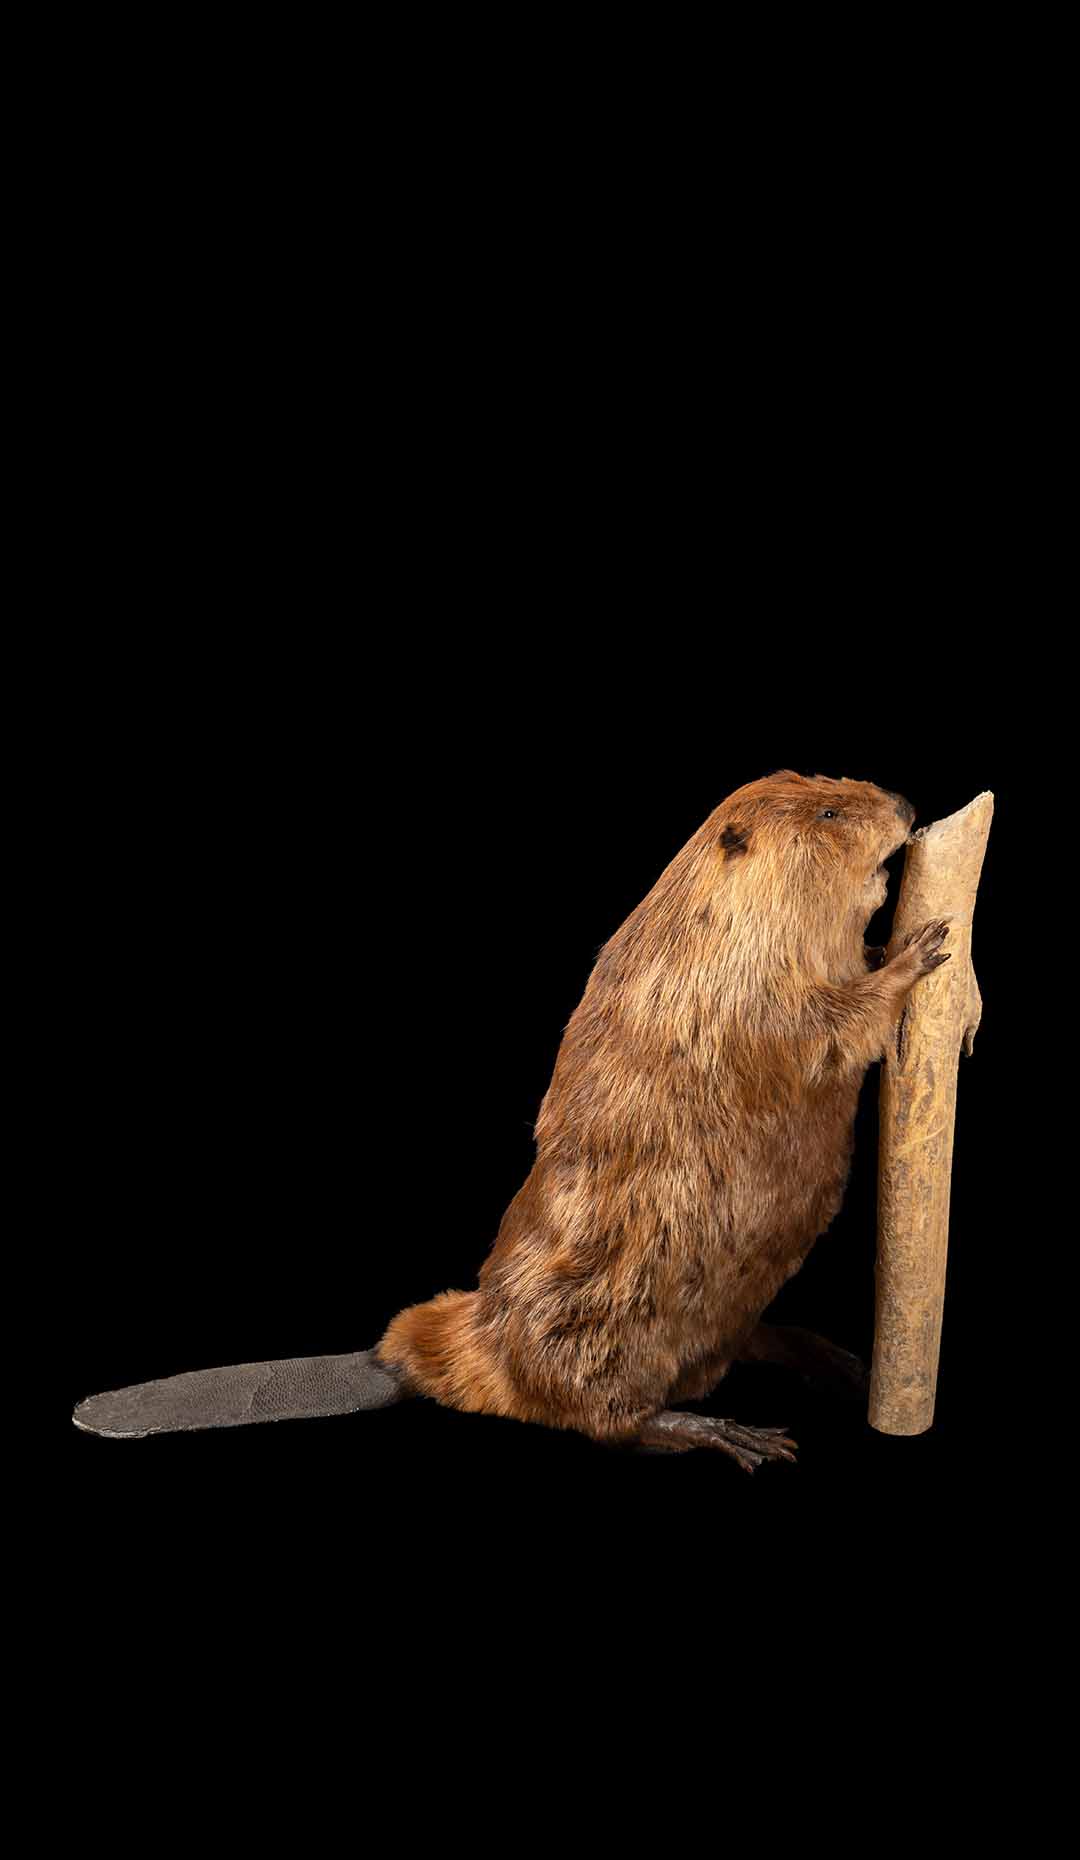 Artfully Preserved: Taxidermy North American Beaver in Natural Pose